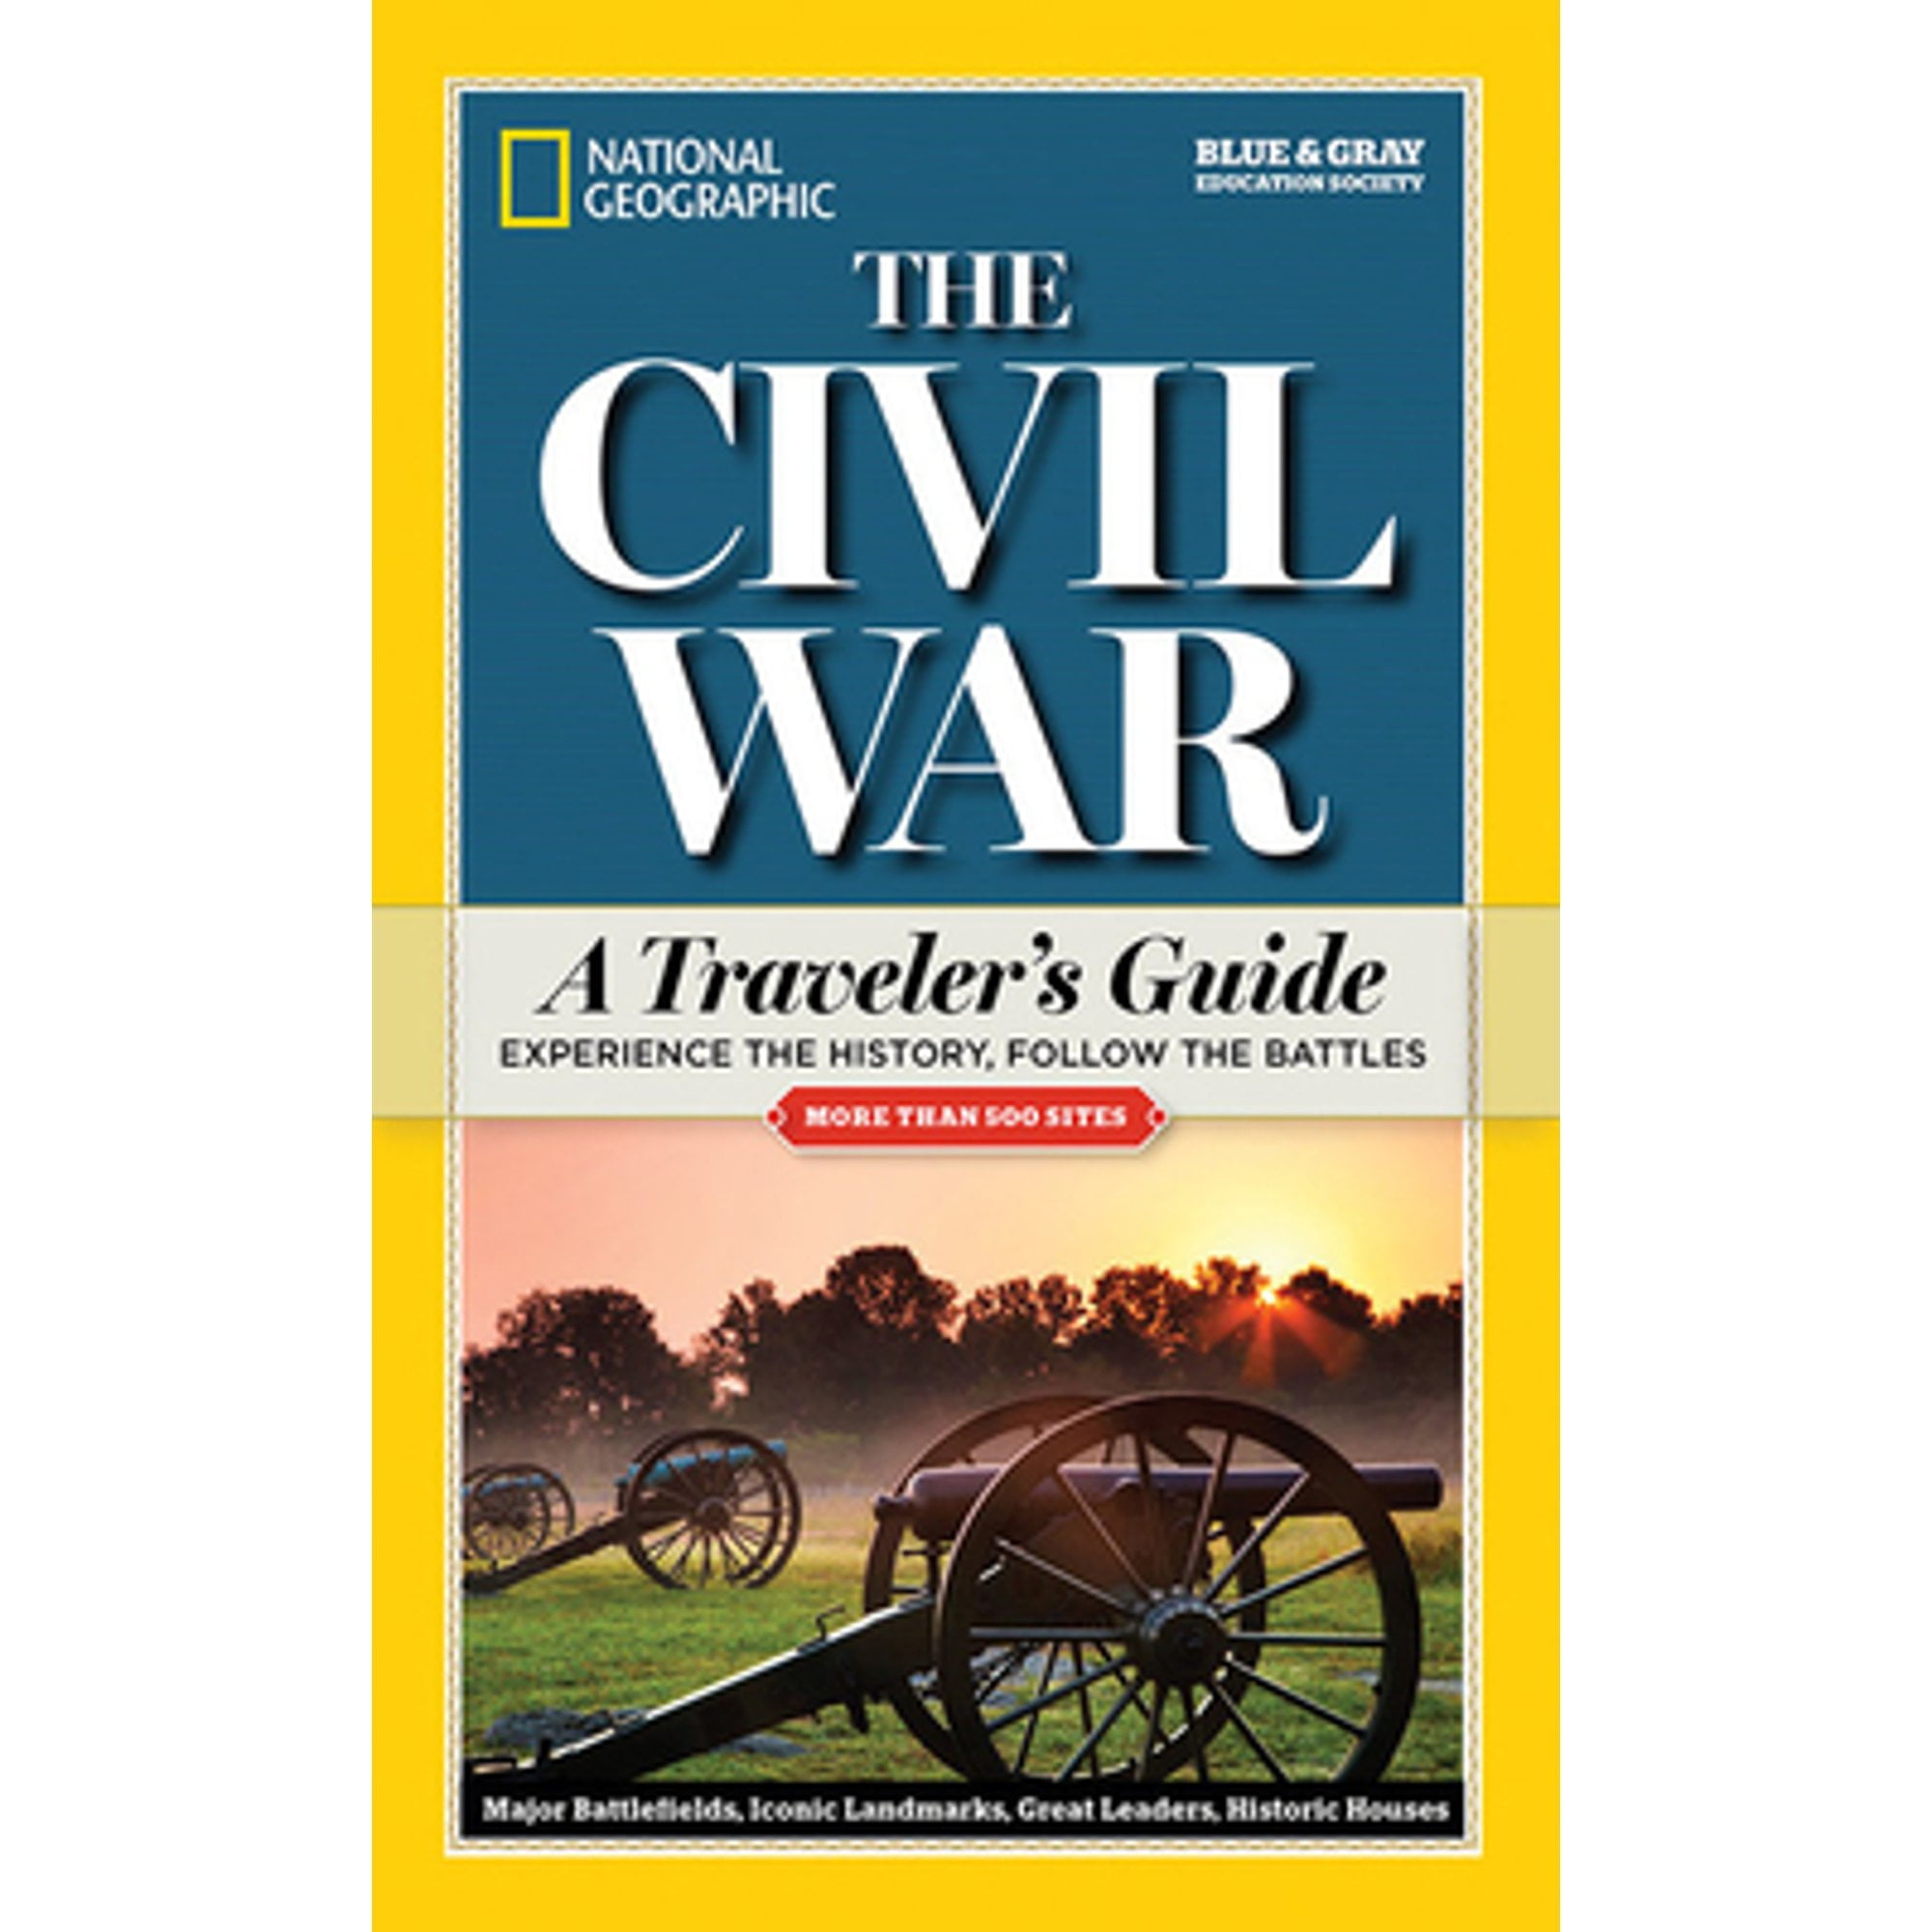 Pre-Owned National Geographic The Civil War: A Travelers Guide Blue Gray Education Society Paperback